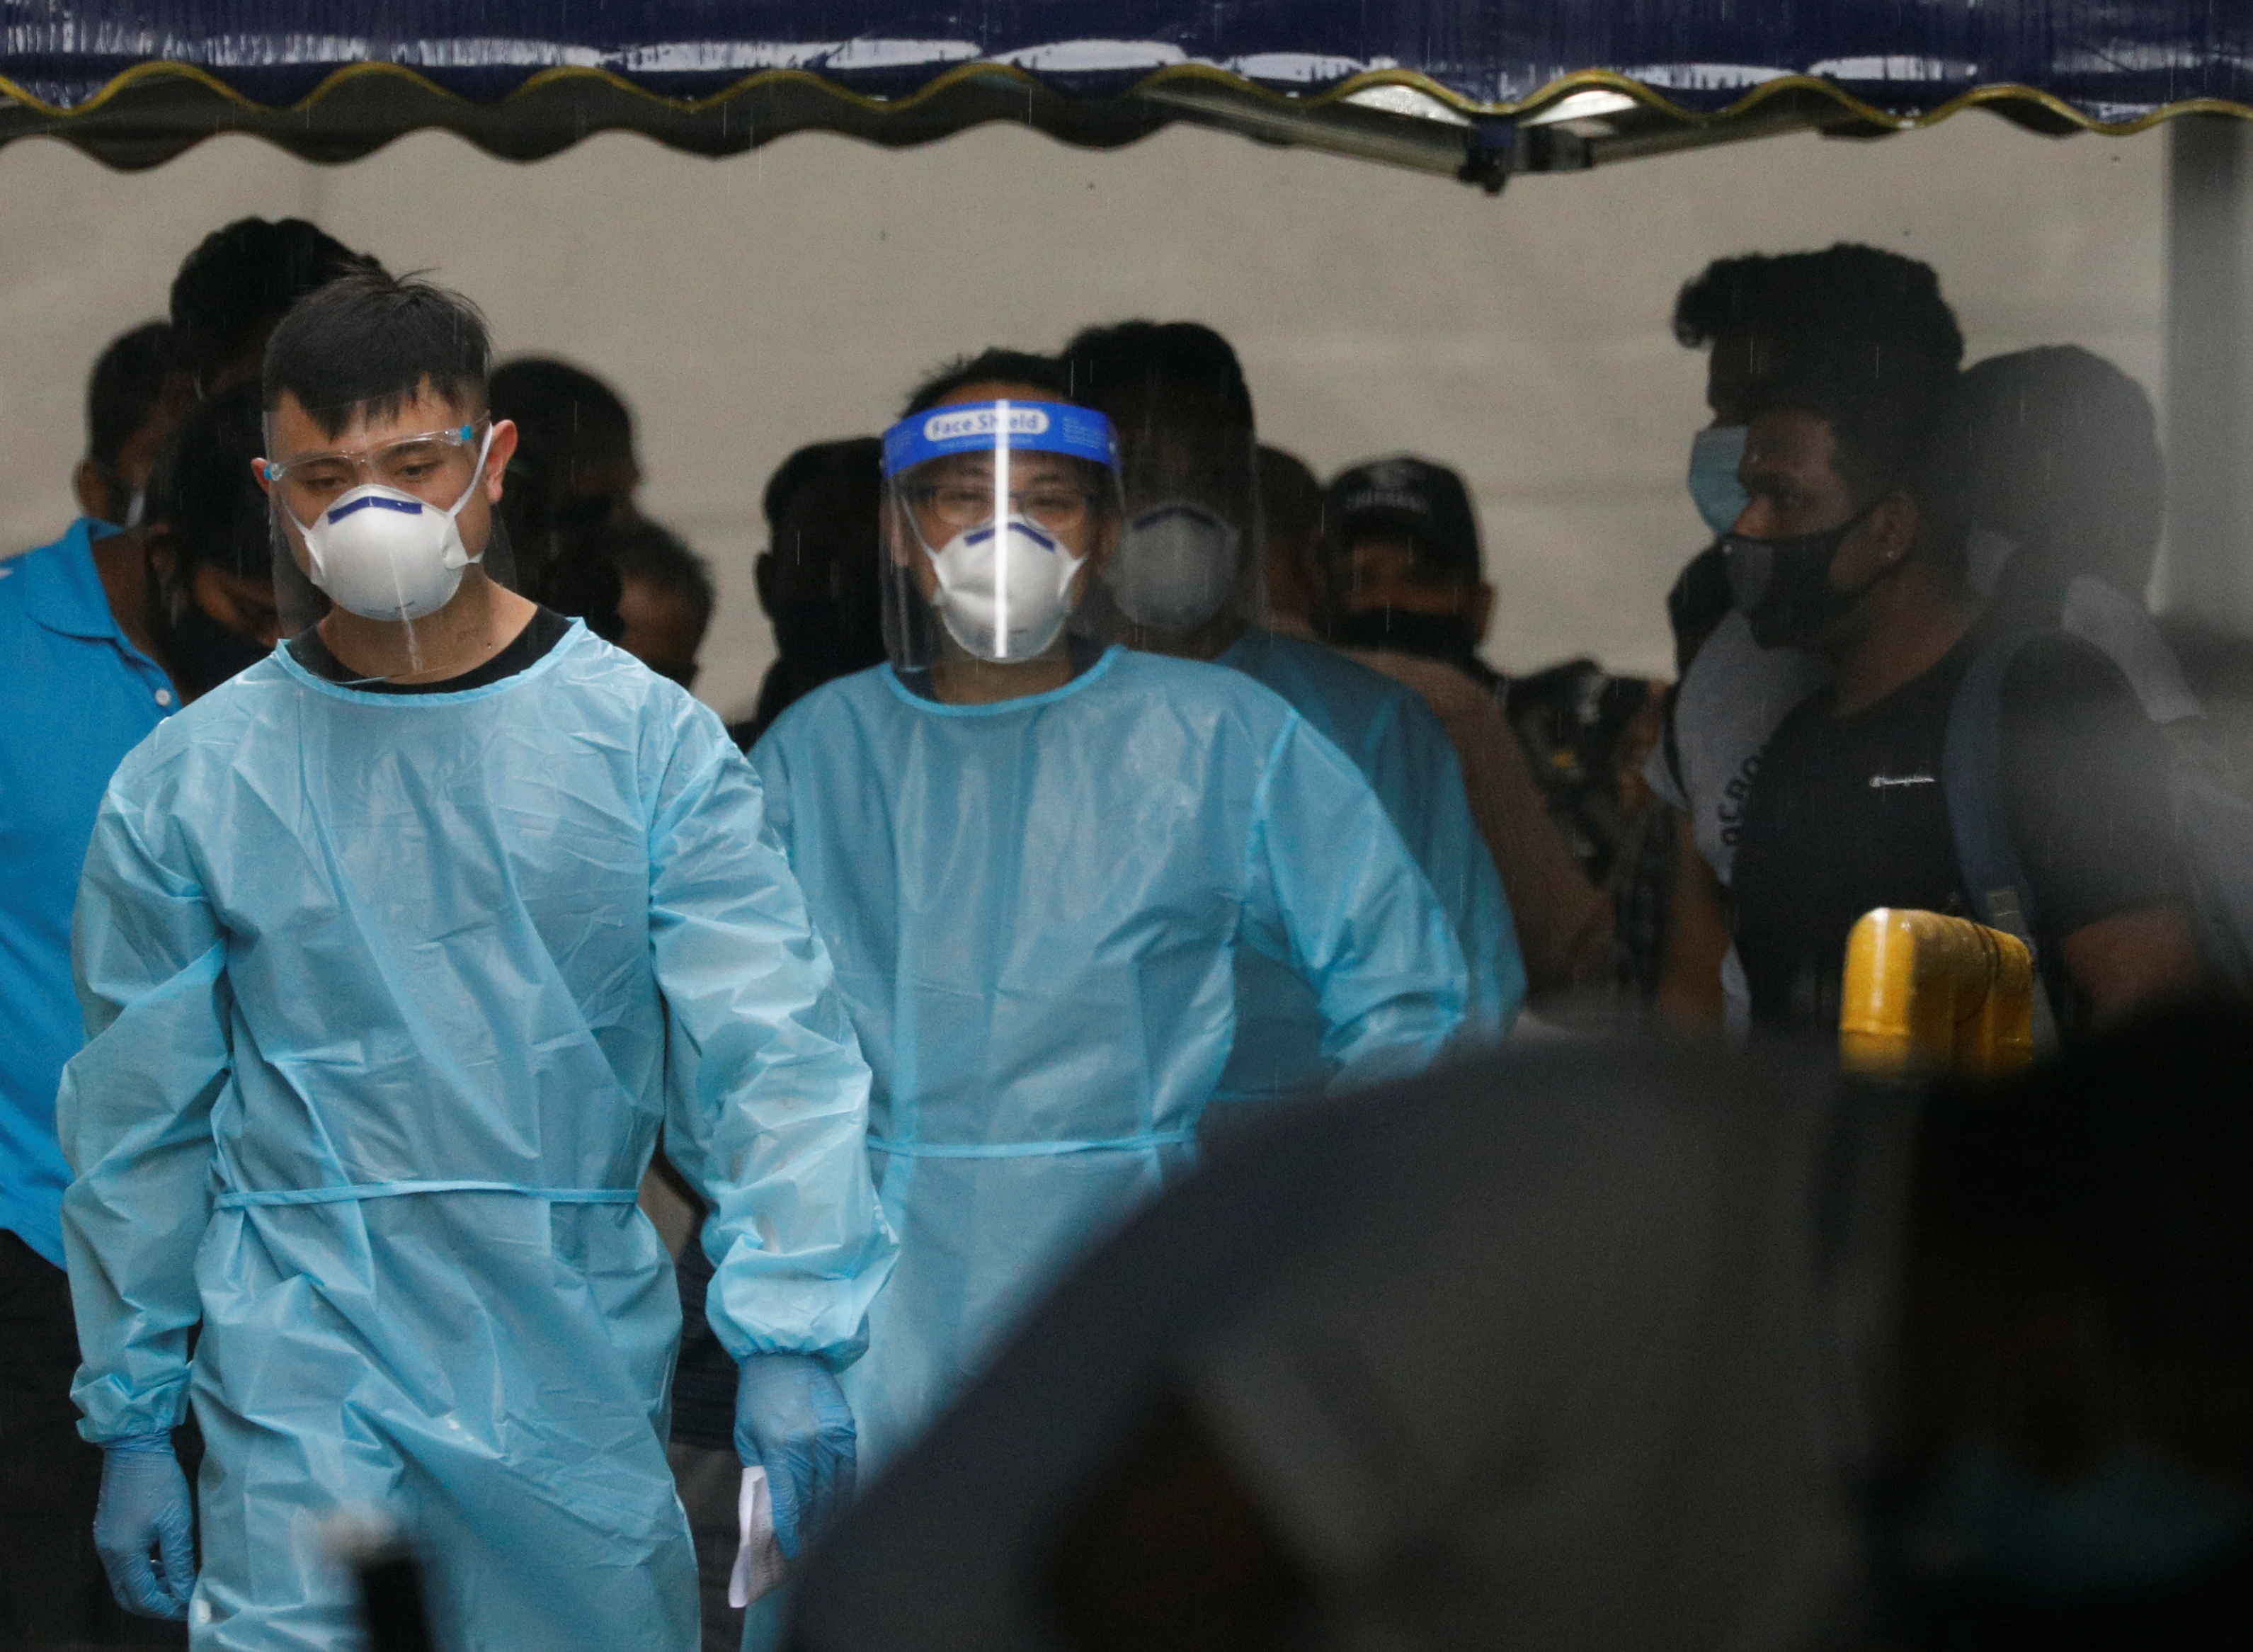 Personnel in protective garment usher a group of migrant workers to take a bus to a government quarantine facility after workers were tested positive for the coronavirus disease (COVID-19) at Westlite Woodlands dormitory in Singapore April 22, 2021.  REUTERS/Edgar Su